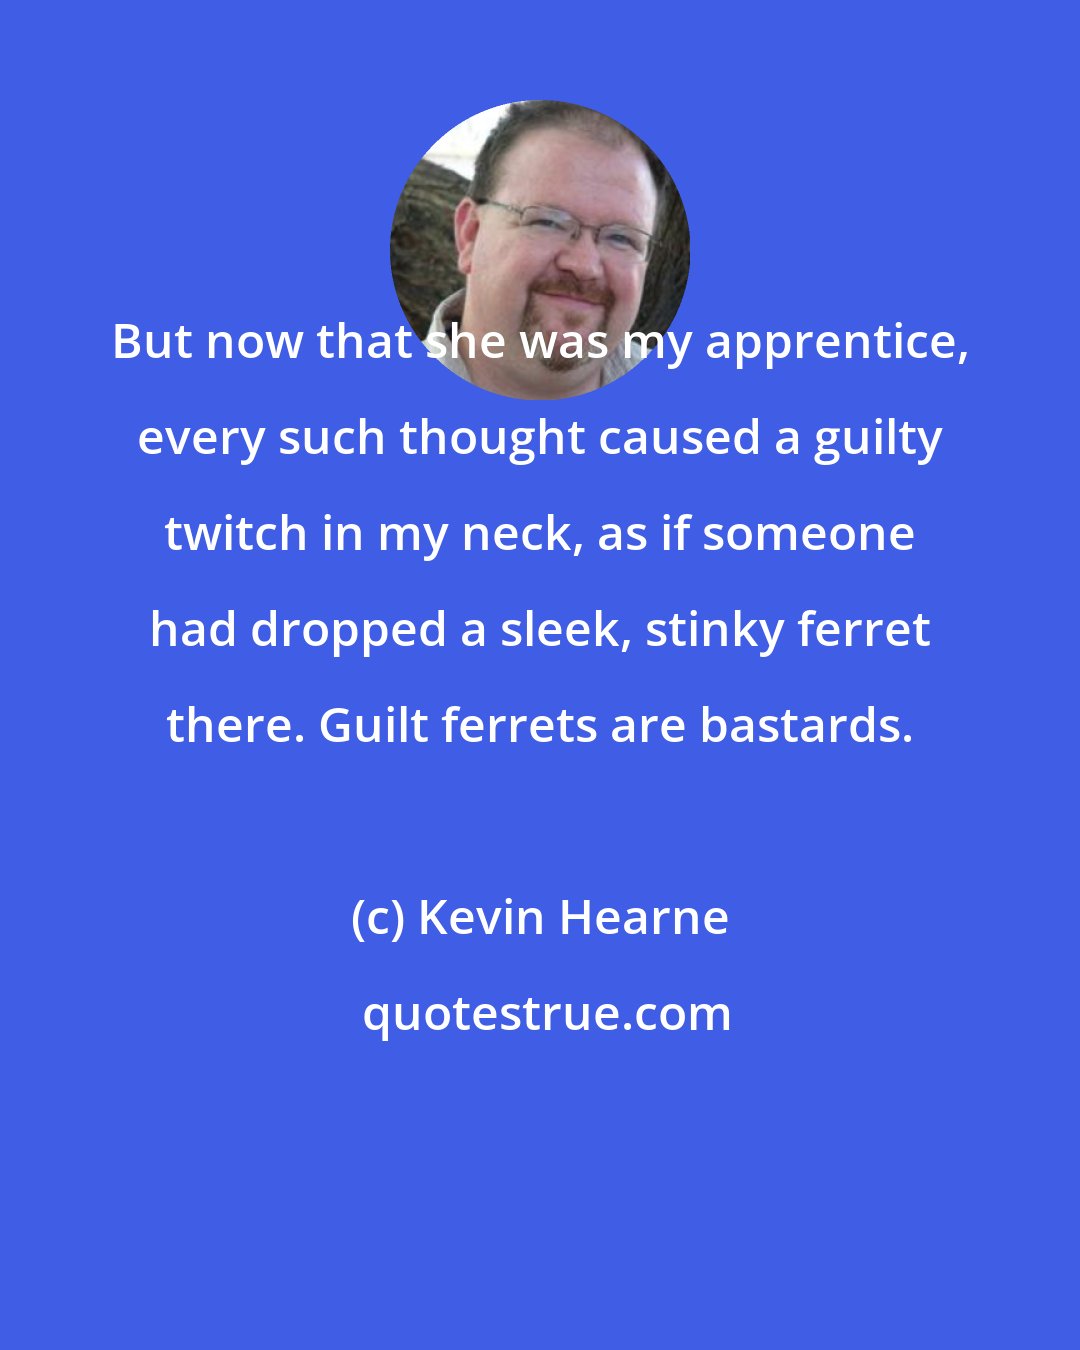 Kevin Hearne: But now that she was my apprentice, every such thought caused a guilty twitch in my neck, as if someone had dropped a sleek, stinky ferret there. Guilt ferrets are bastards.